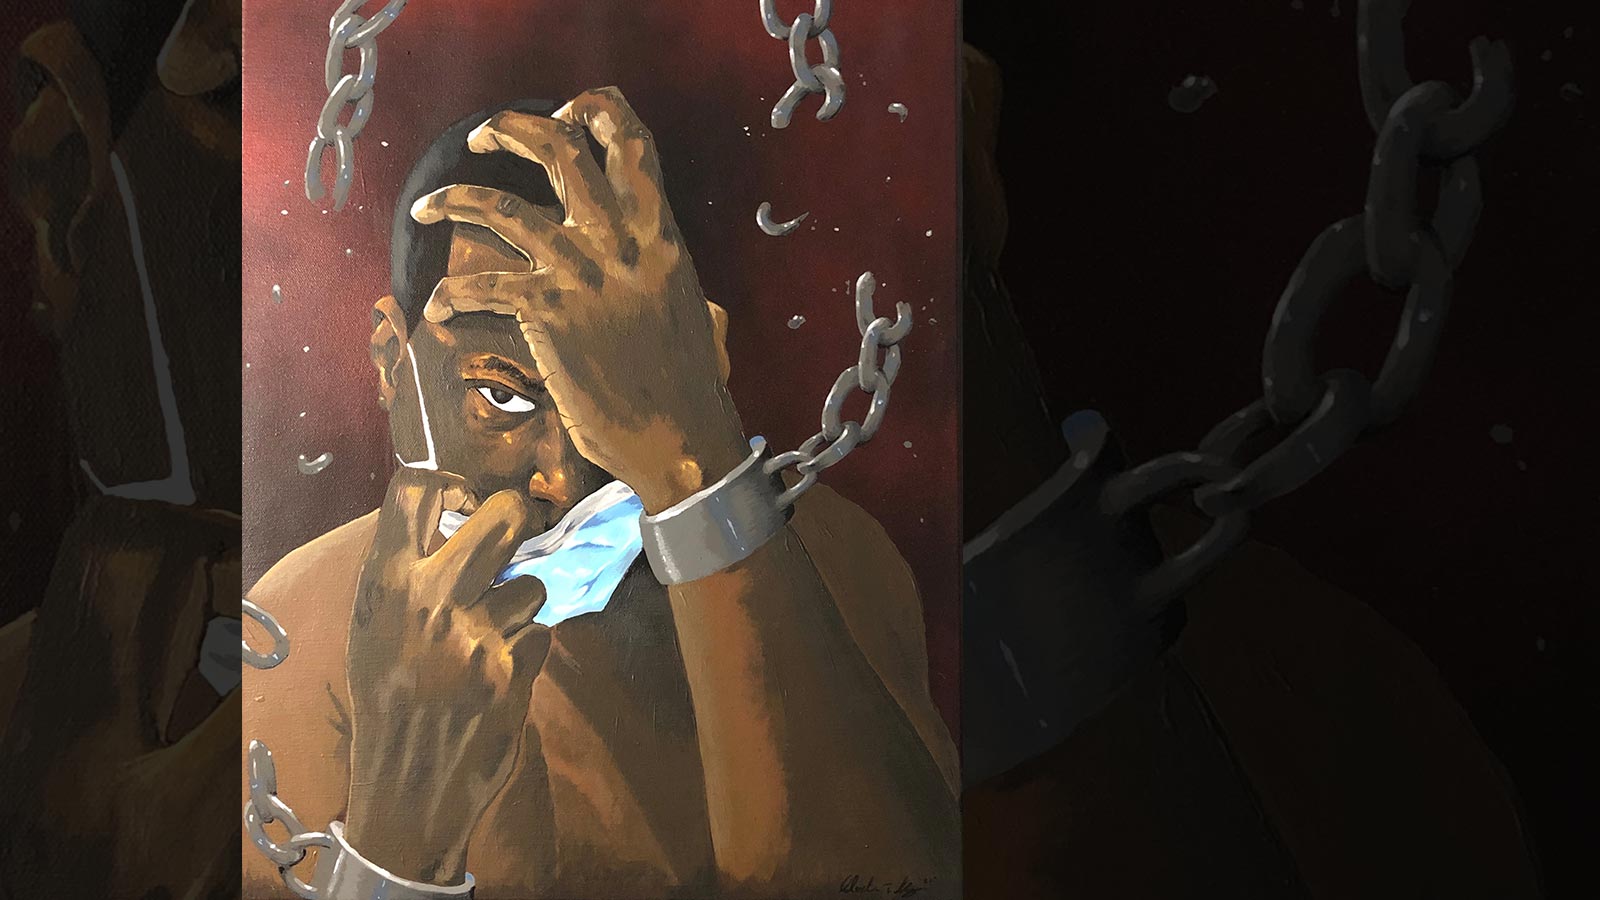 Painting of a man breaking shackles